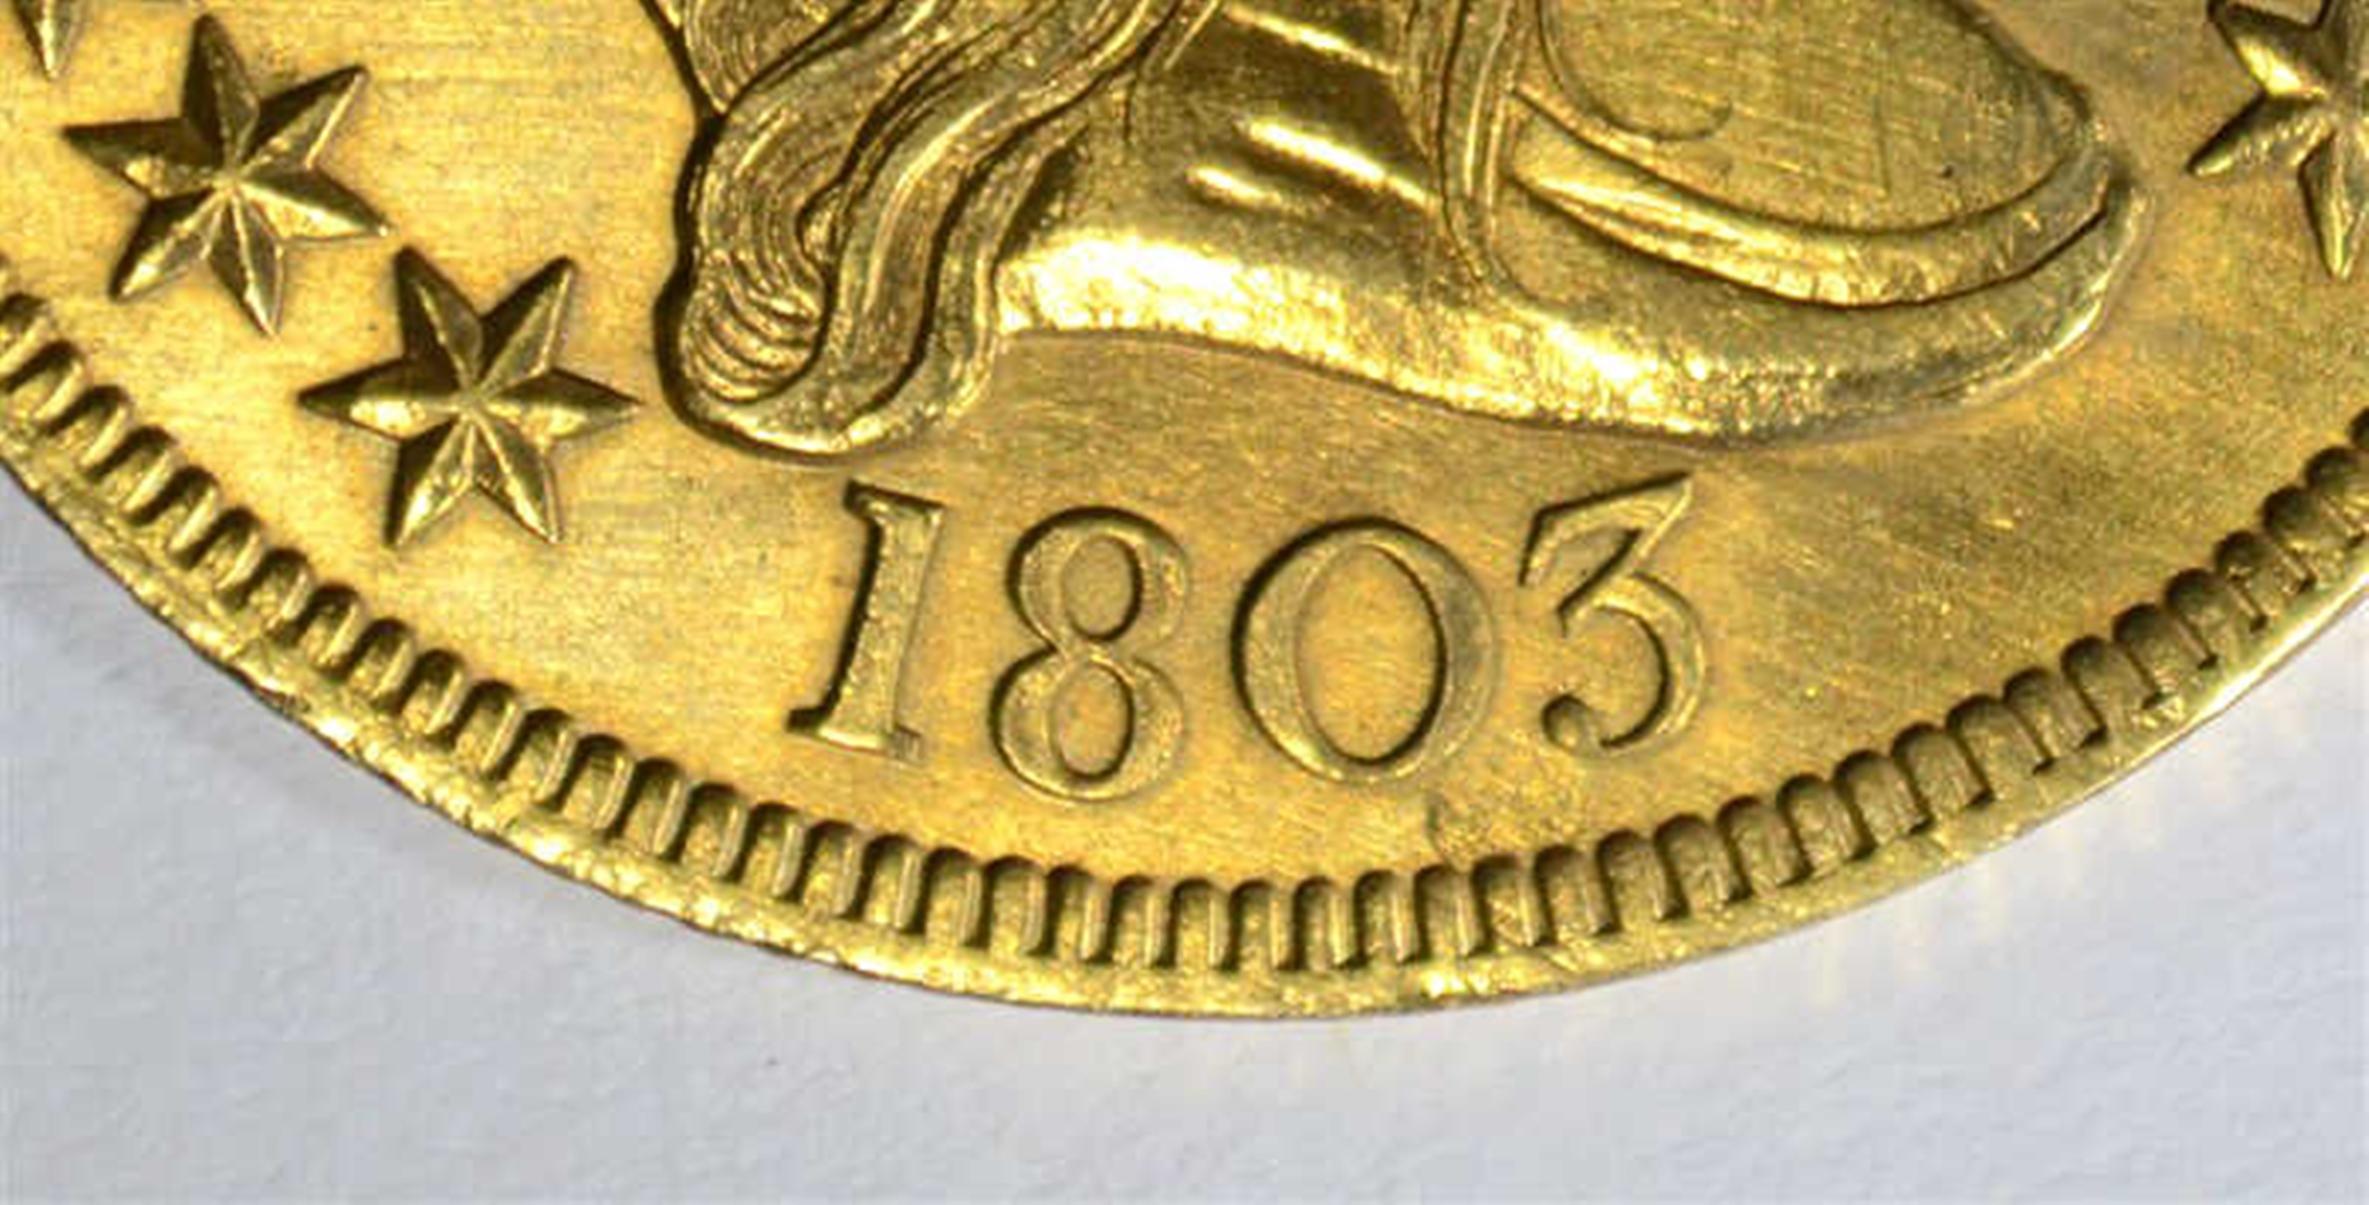 1803 $10.00 GOLD CH BU EXTREMELY RARE!